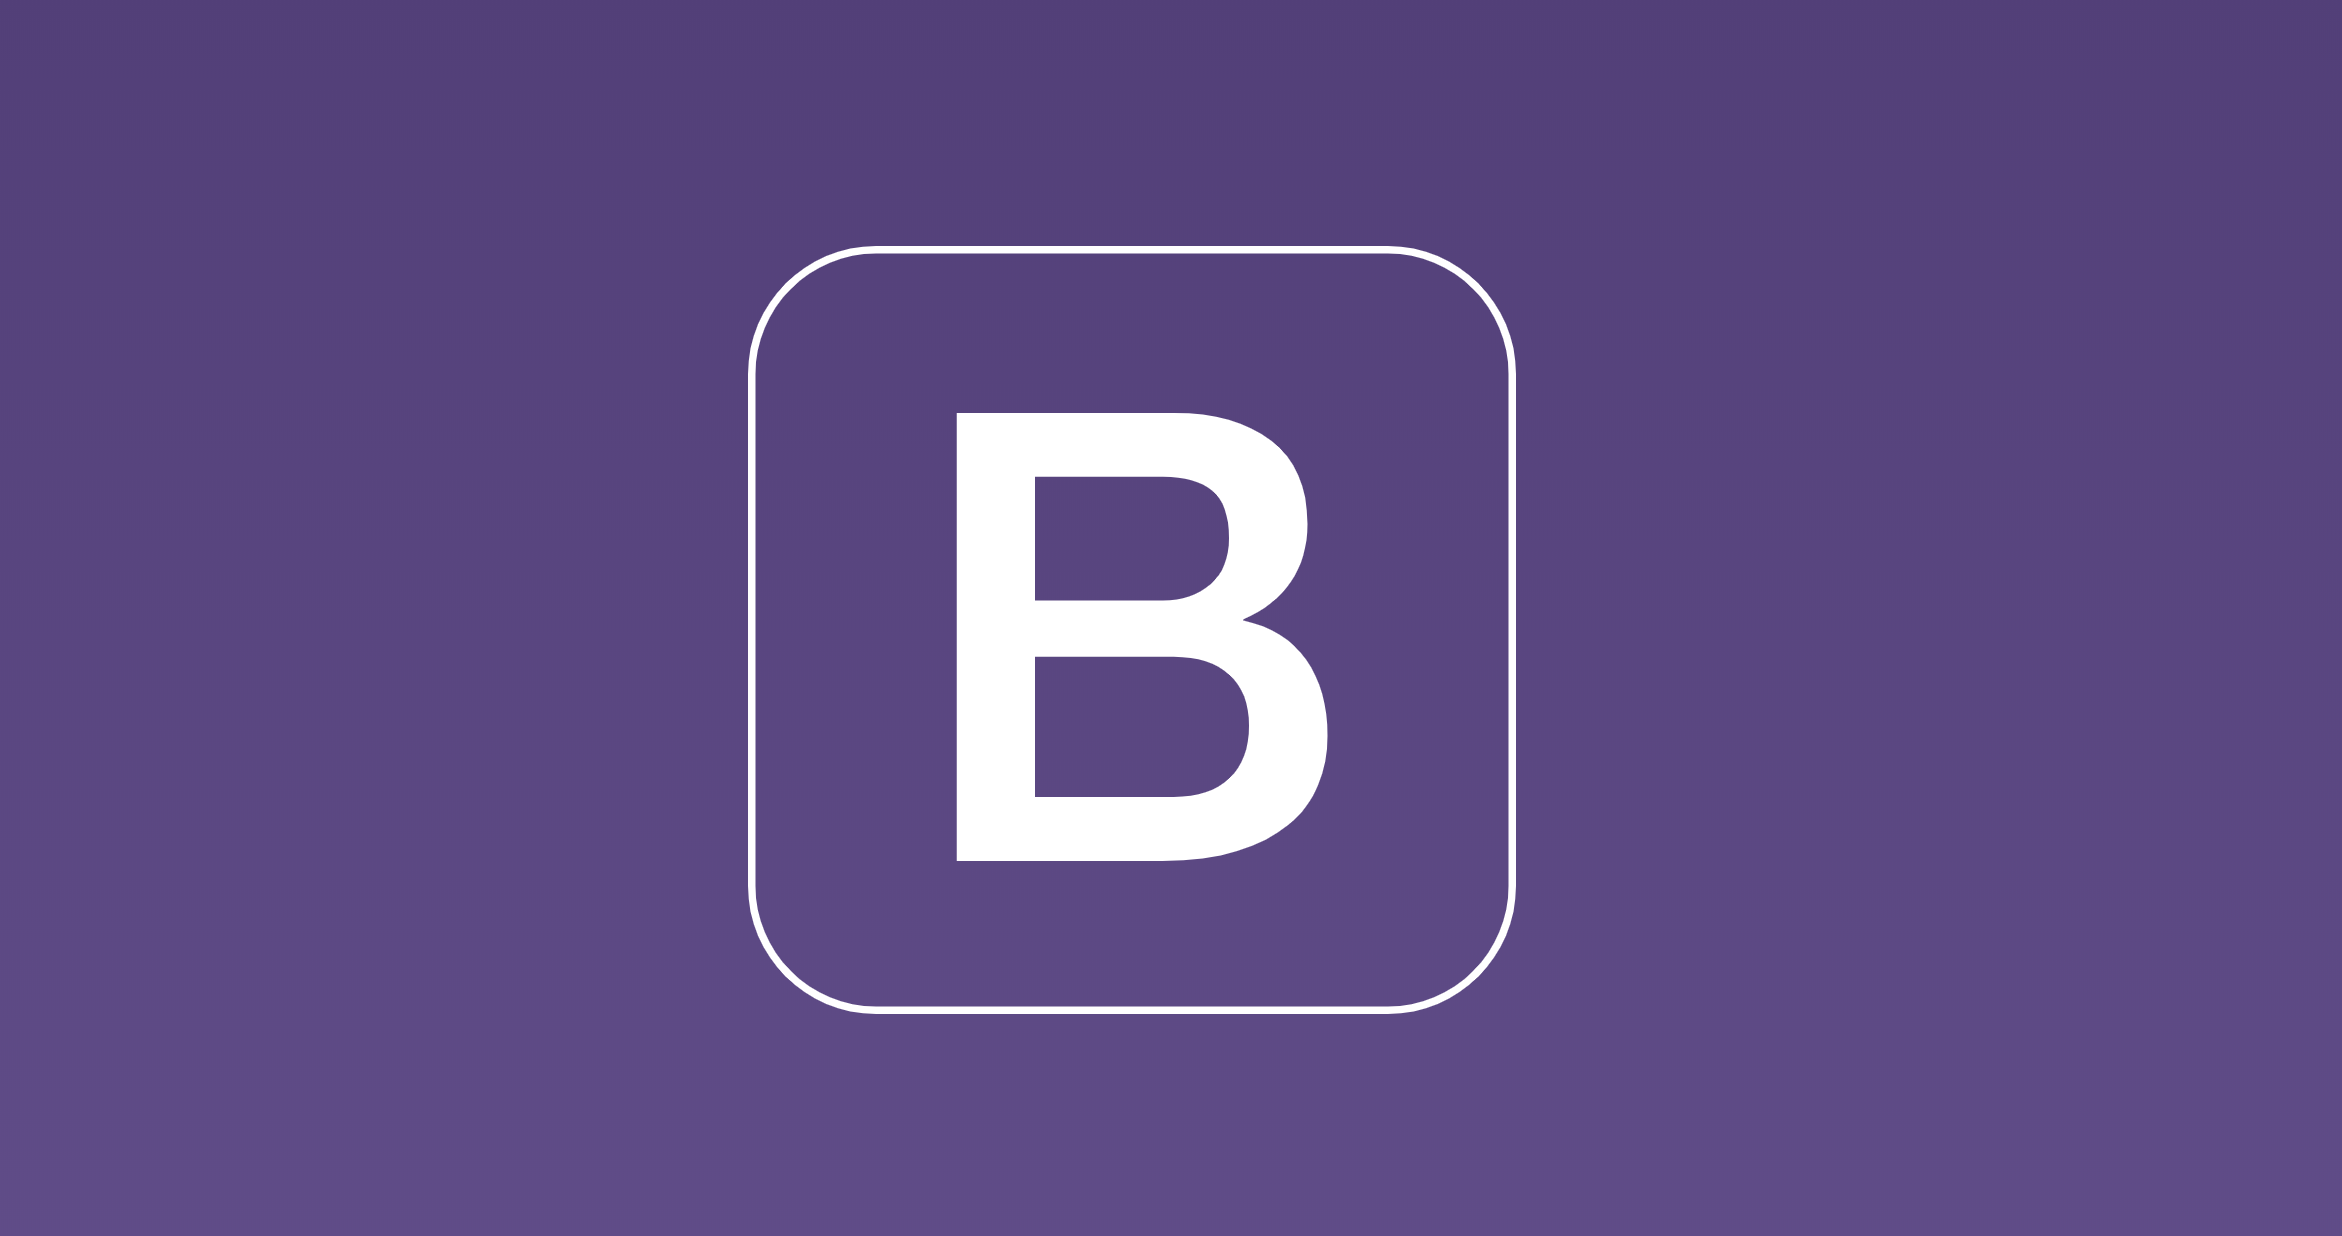 Bootstrap Patches XSS Vulnerability in Versions 4.3.1 and 3.4.1